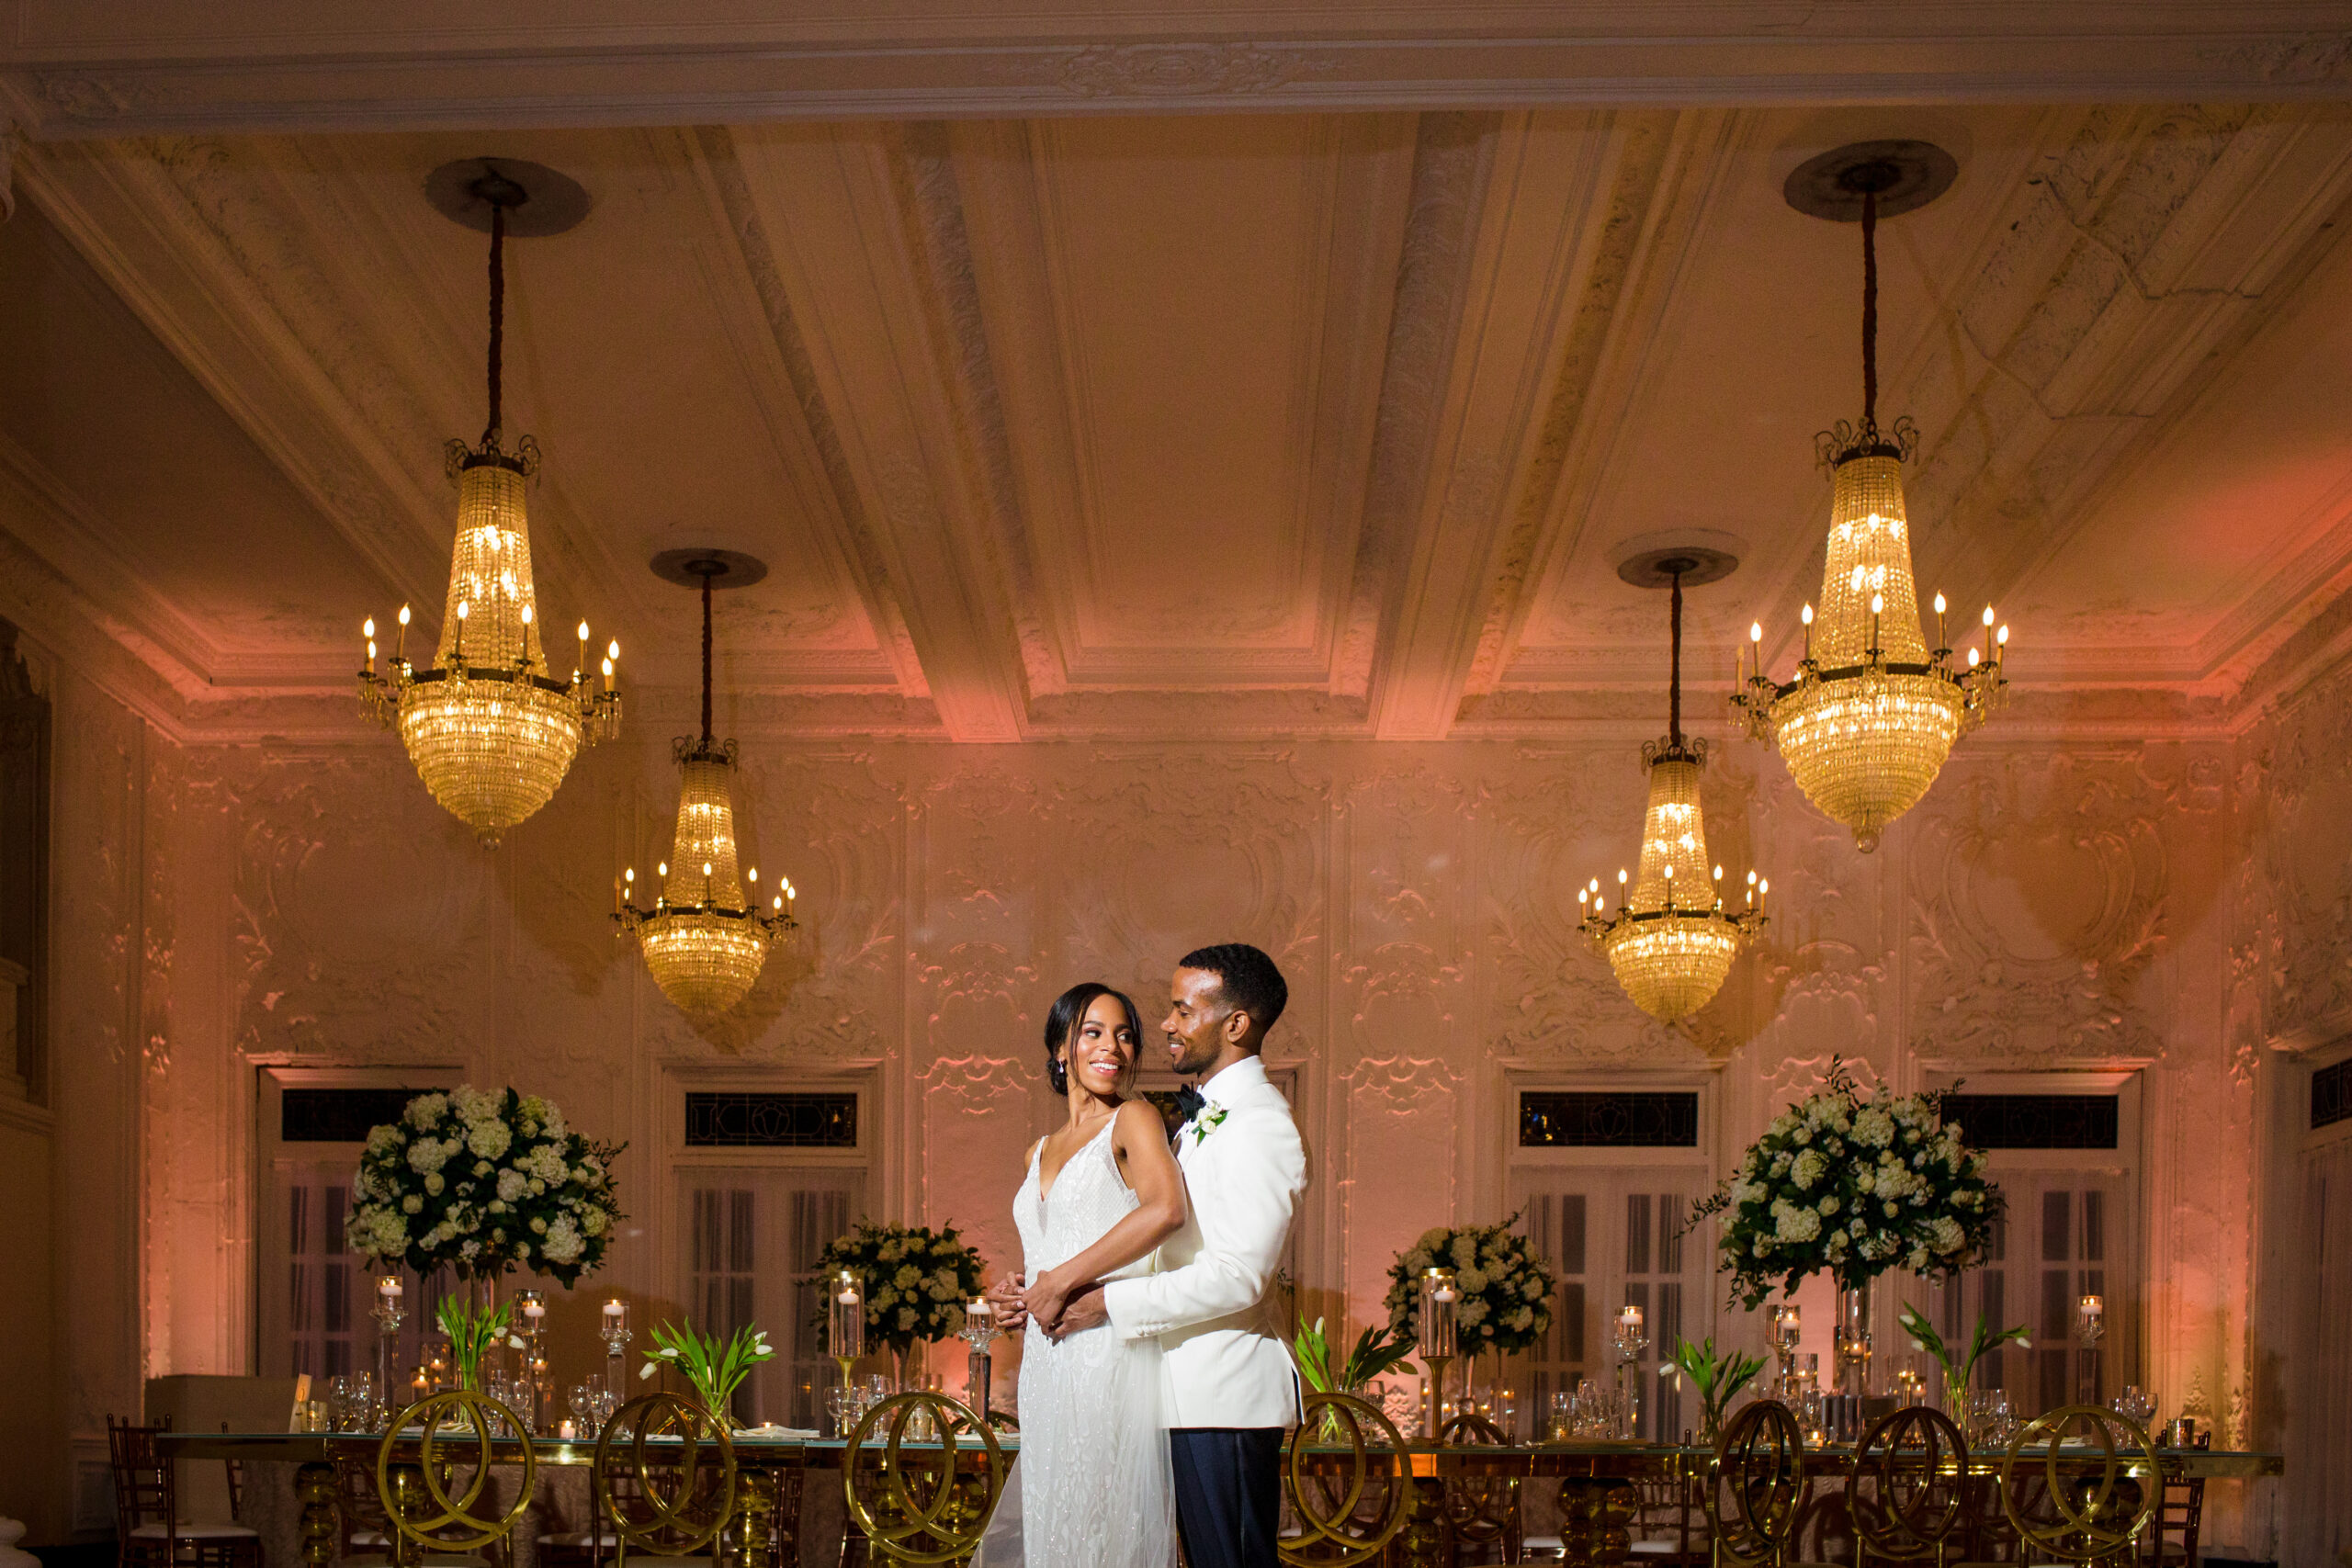 A bride and groom posing in front of chandeliers in a ballroom.